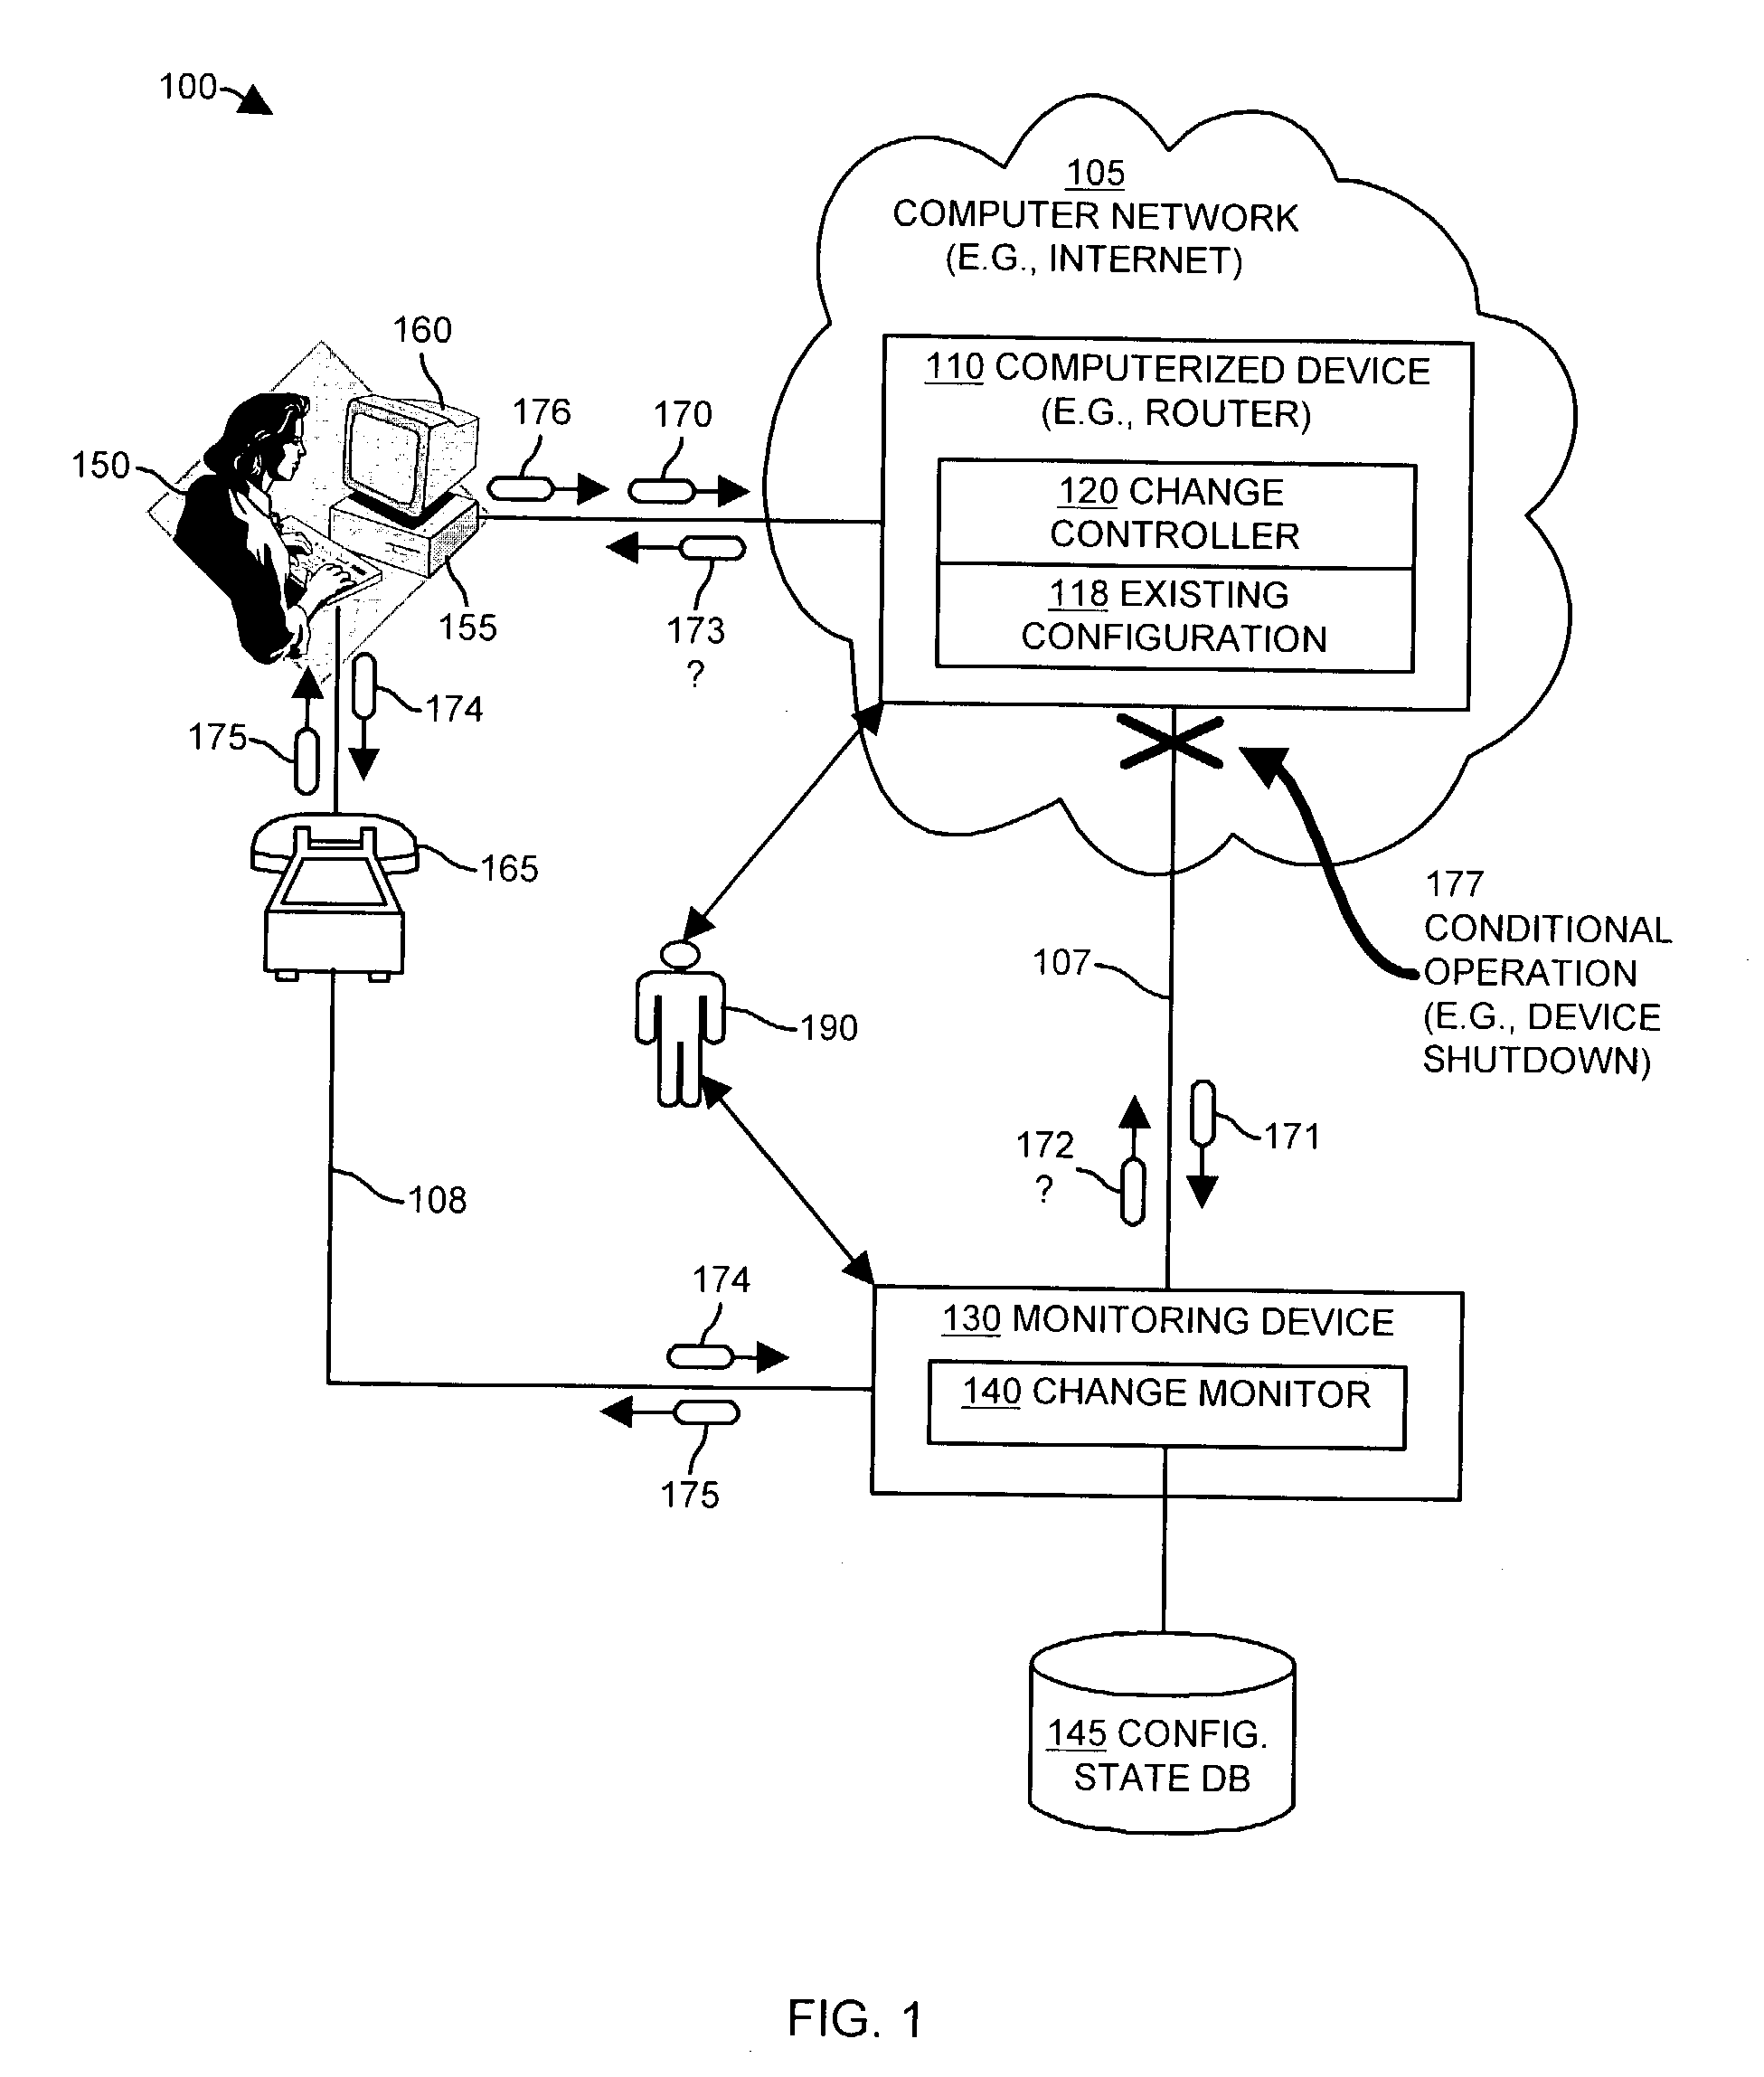 Methods and apparatus for auditing and tracking changes to an existing configuration of a computerized device